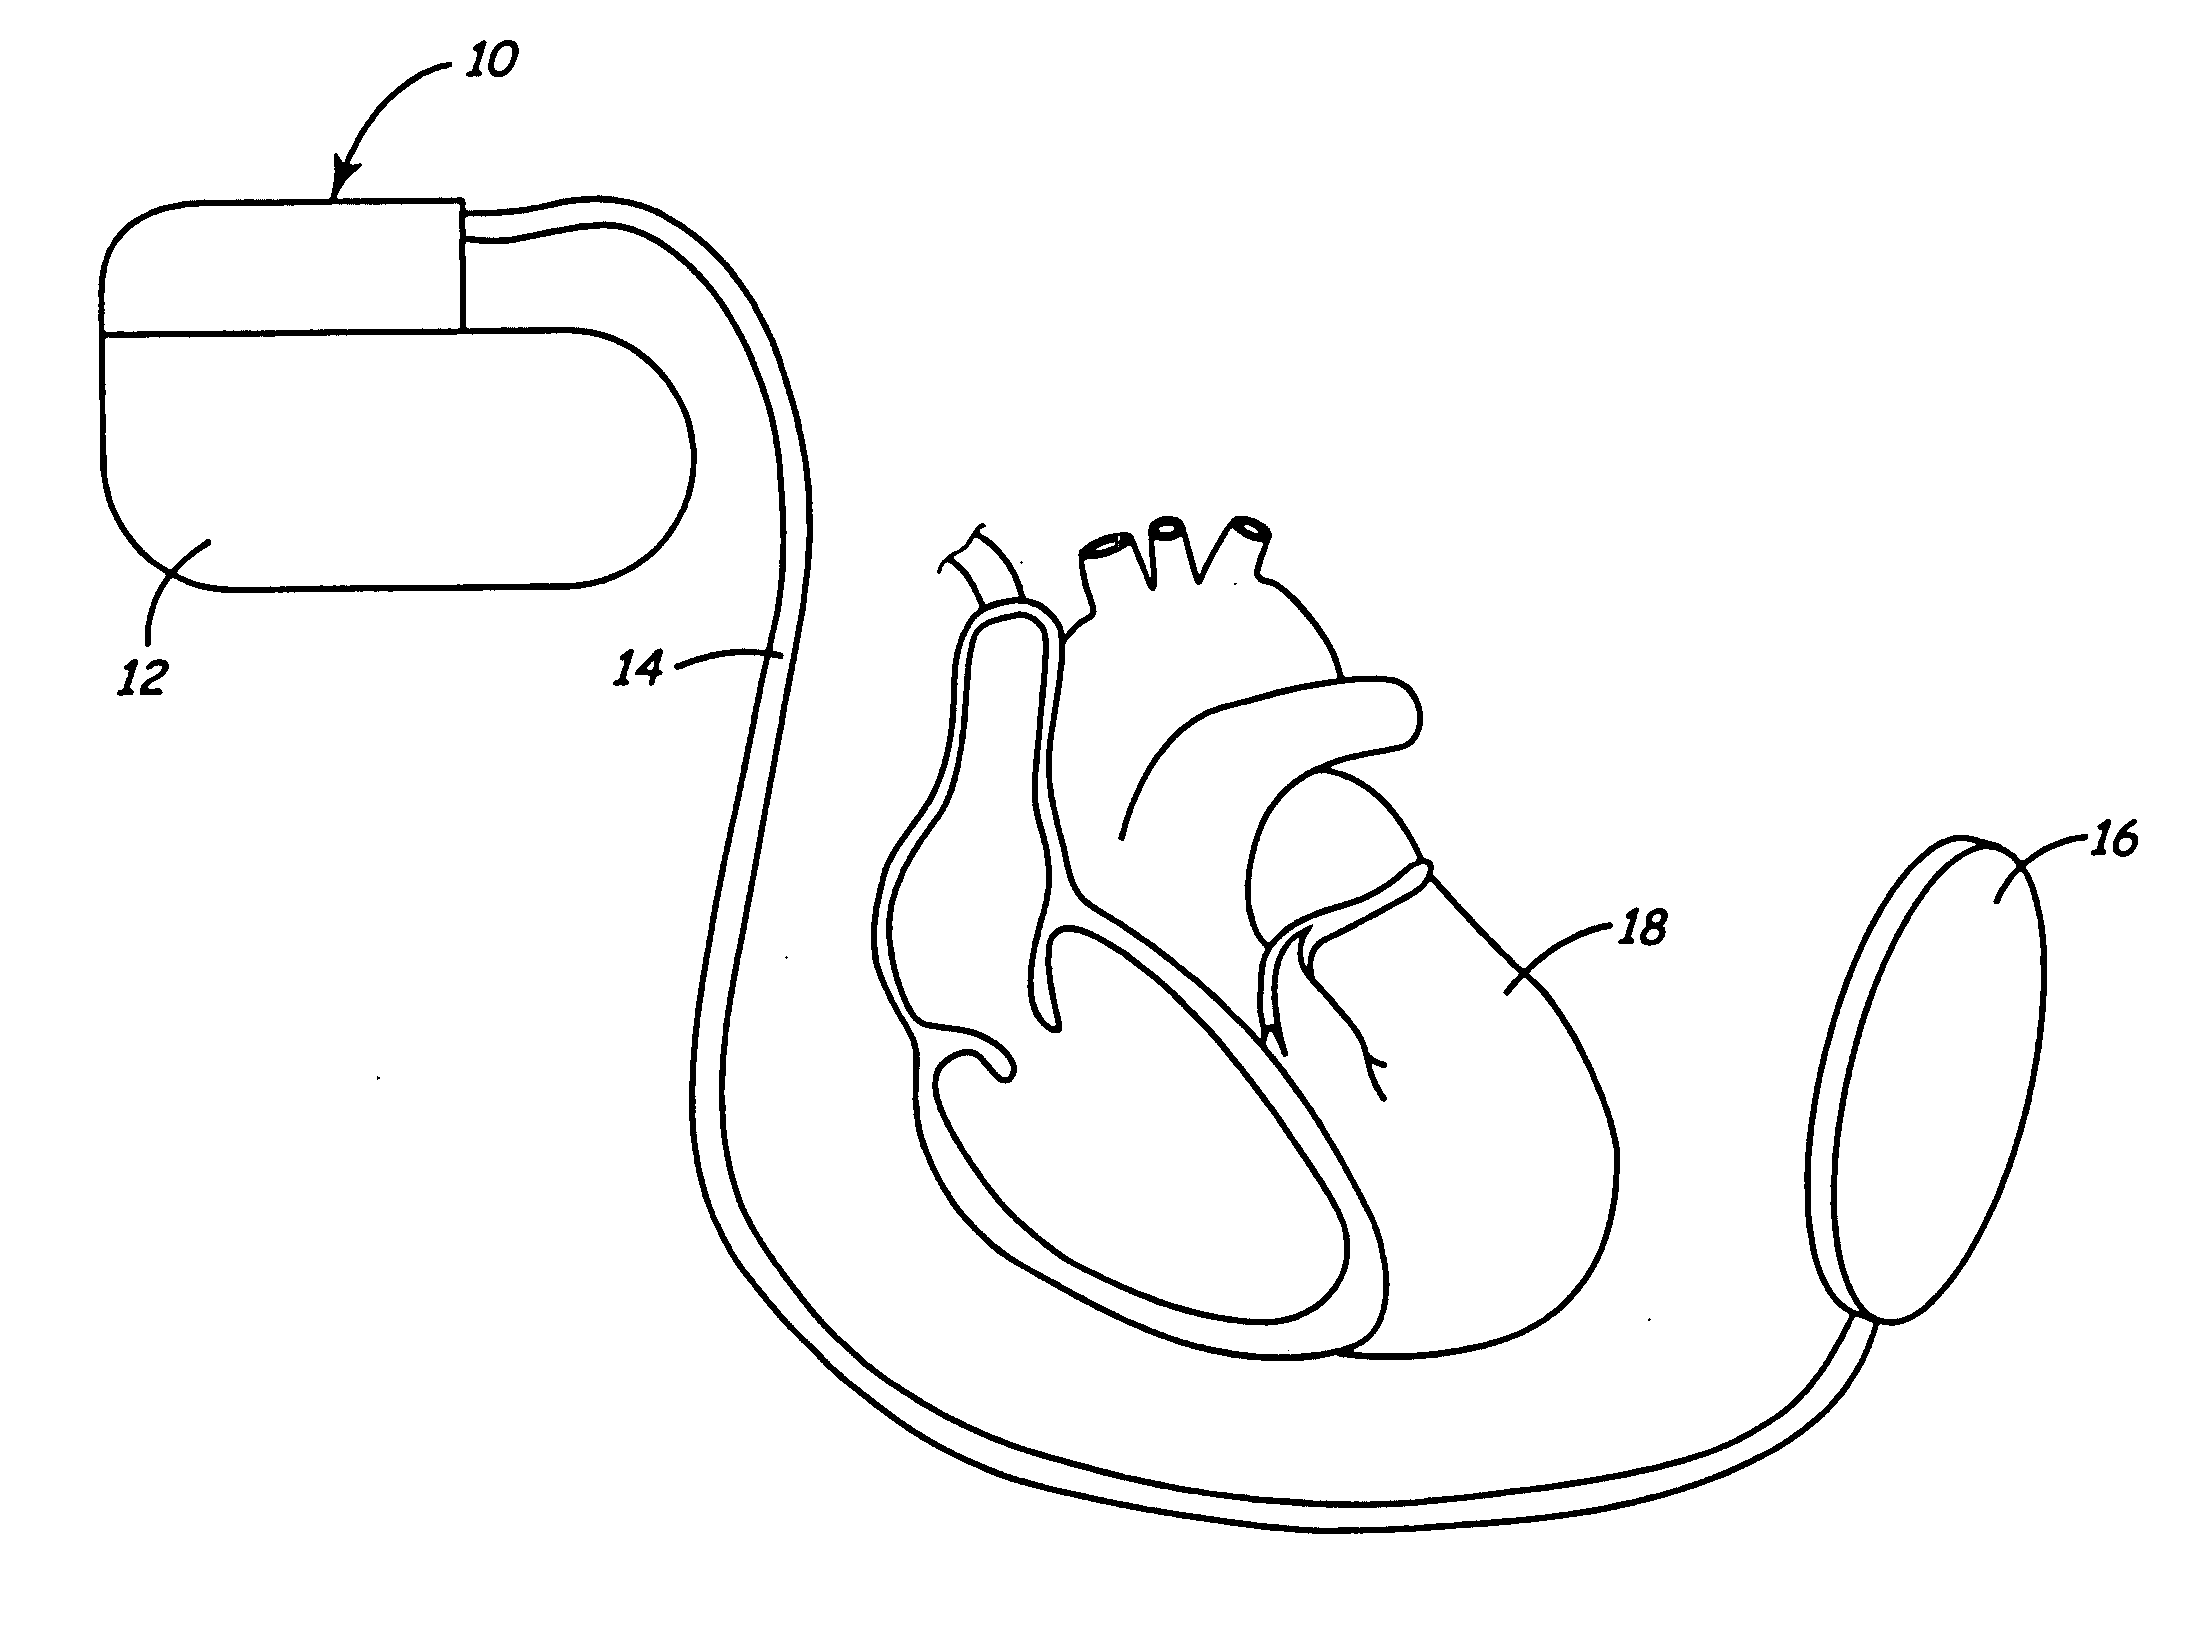 Apparatus for detecting and treating ventricular arrhythmia